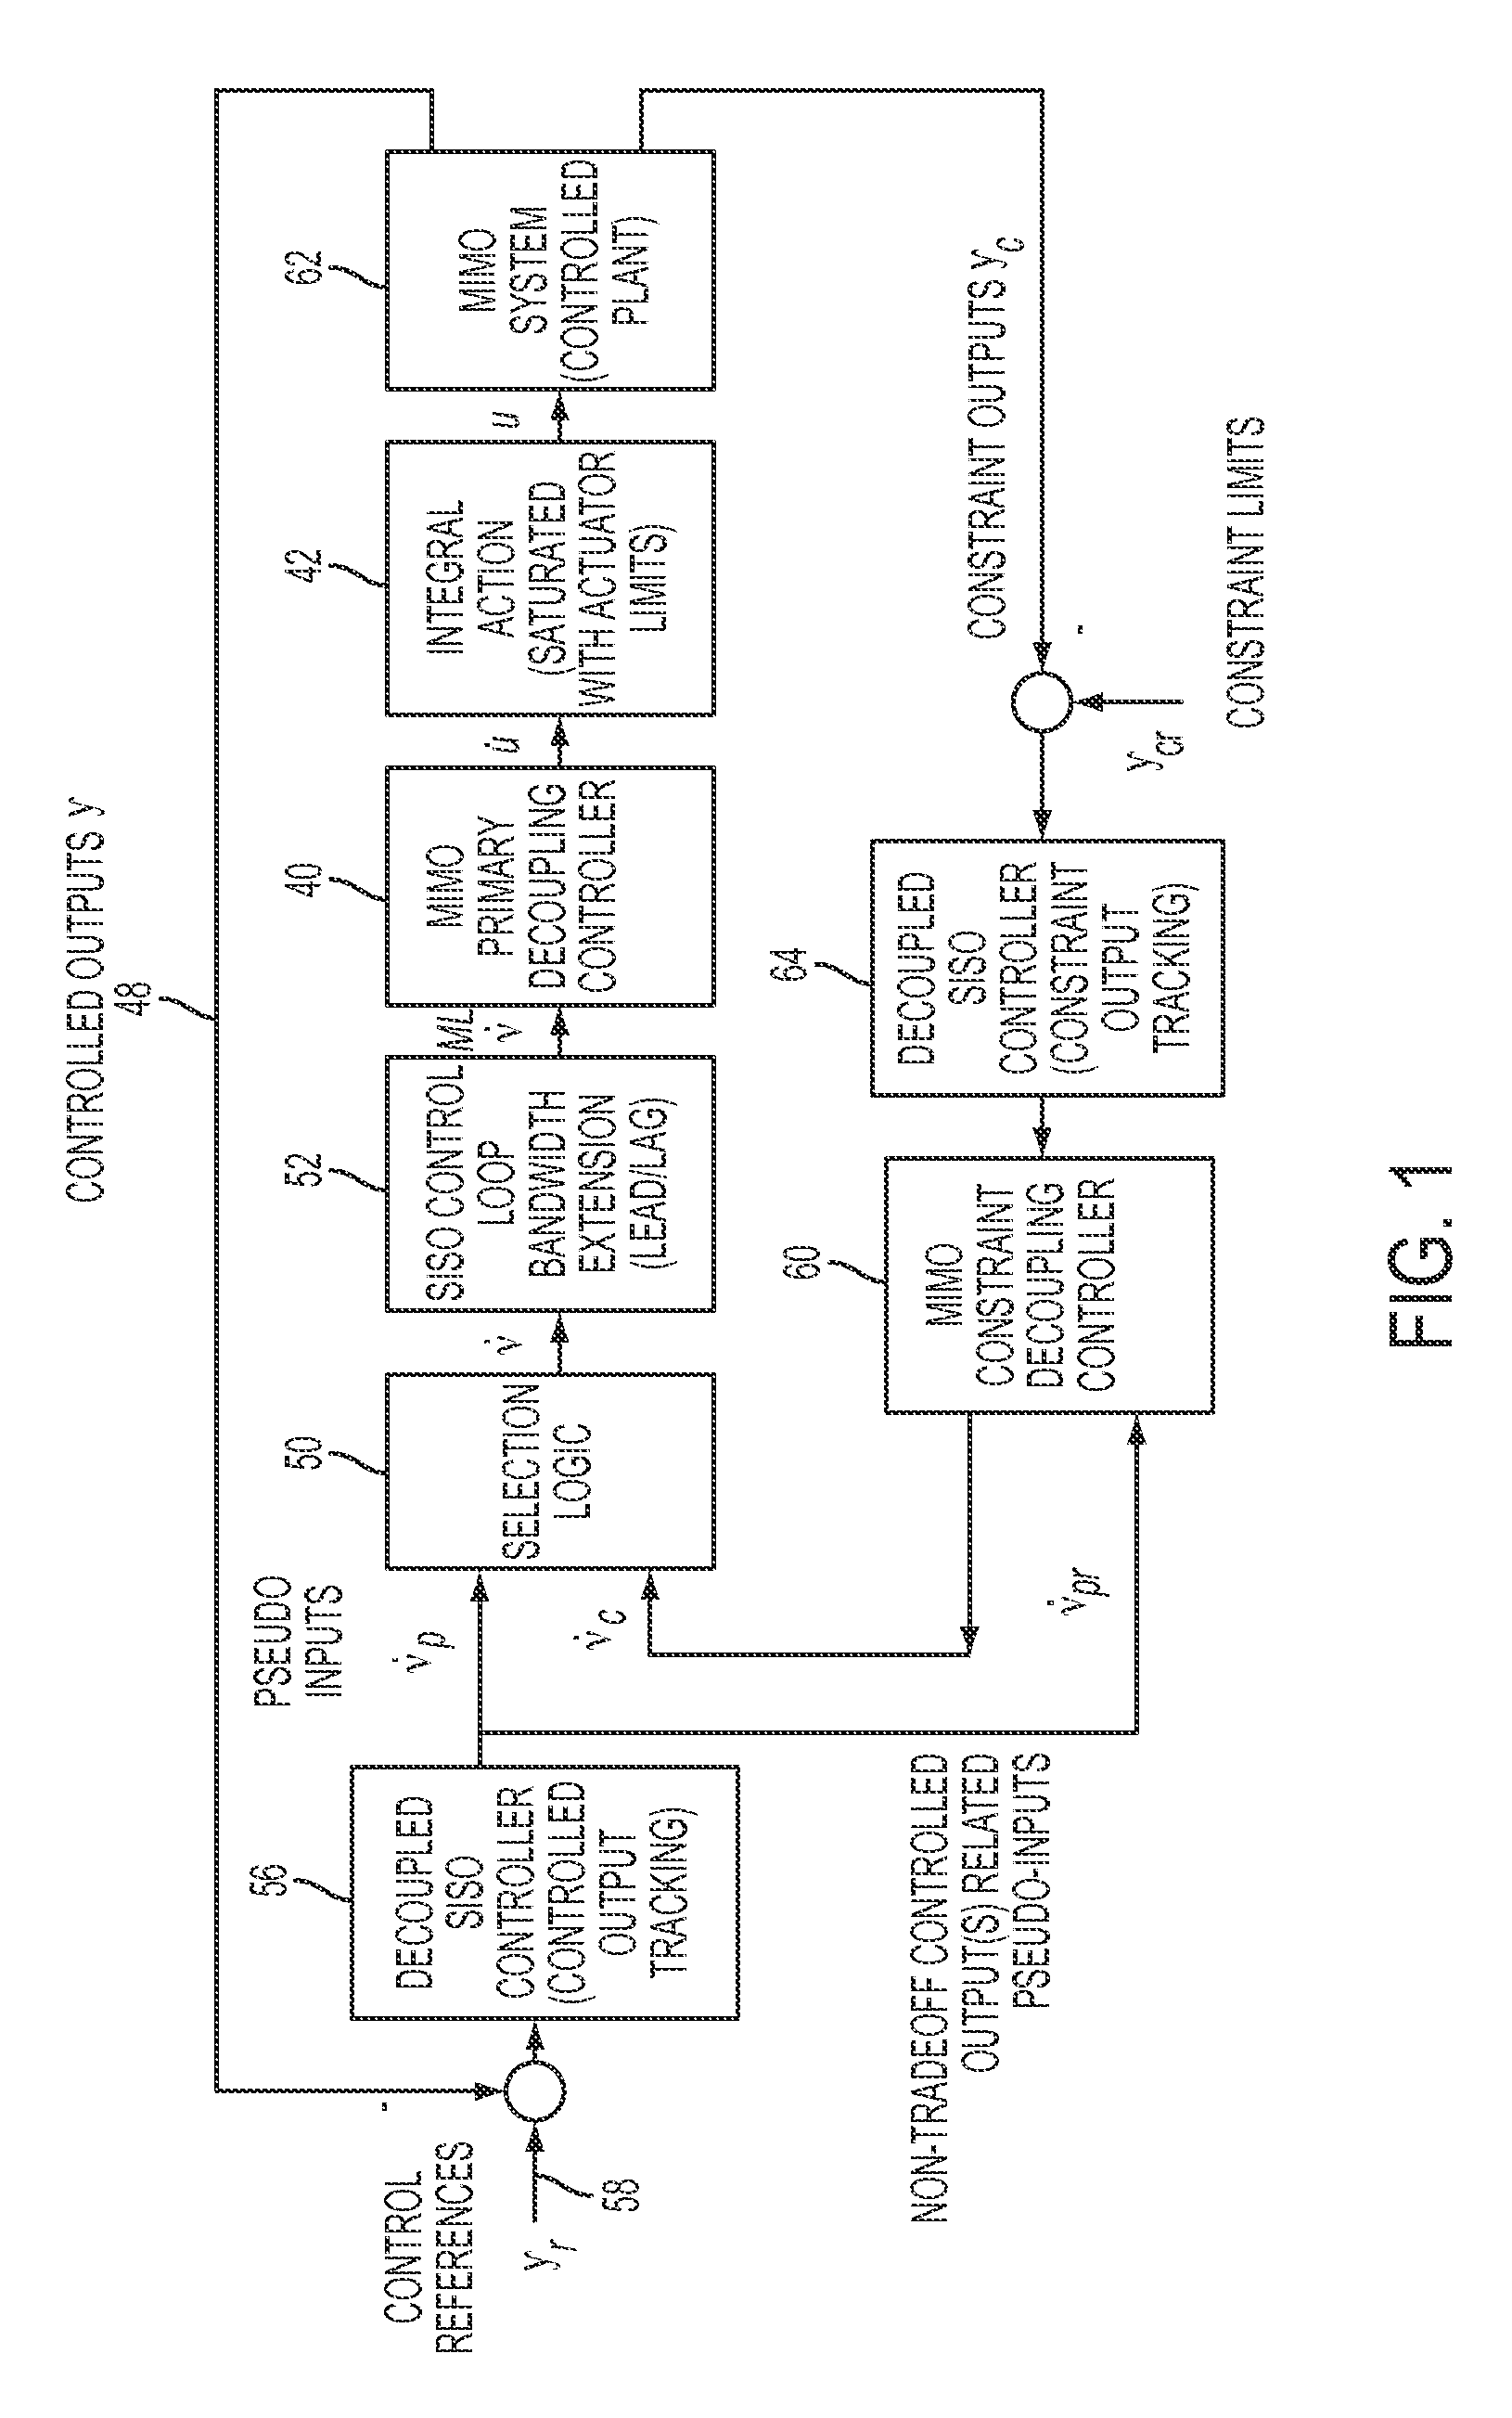 Methods and apparatuses for advanced multiple variable control with high dimension multiple constraints